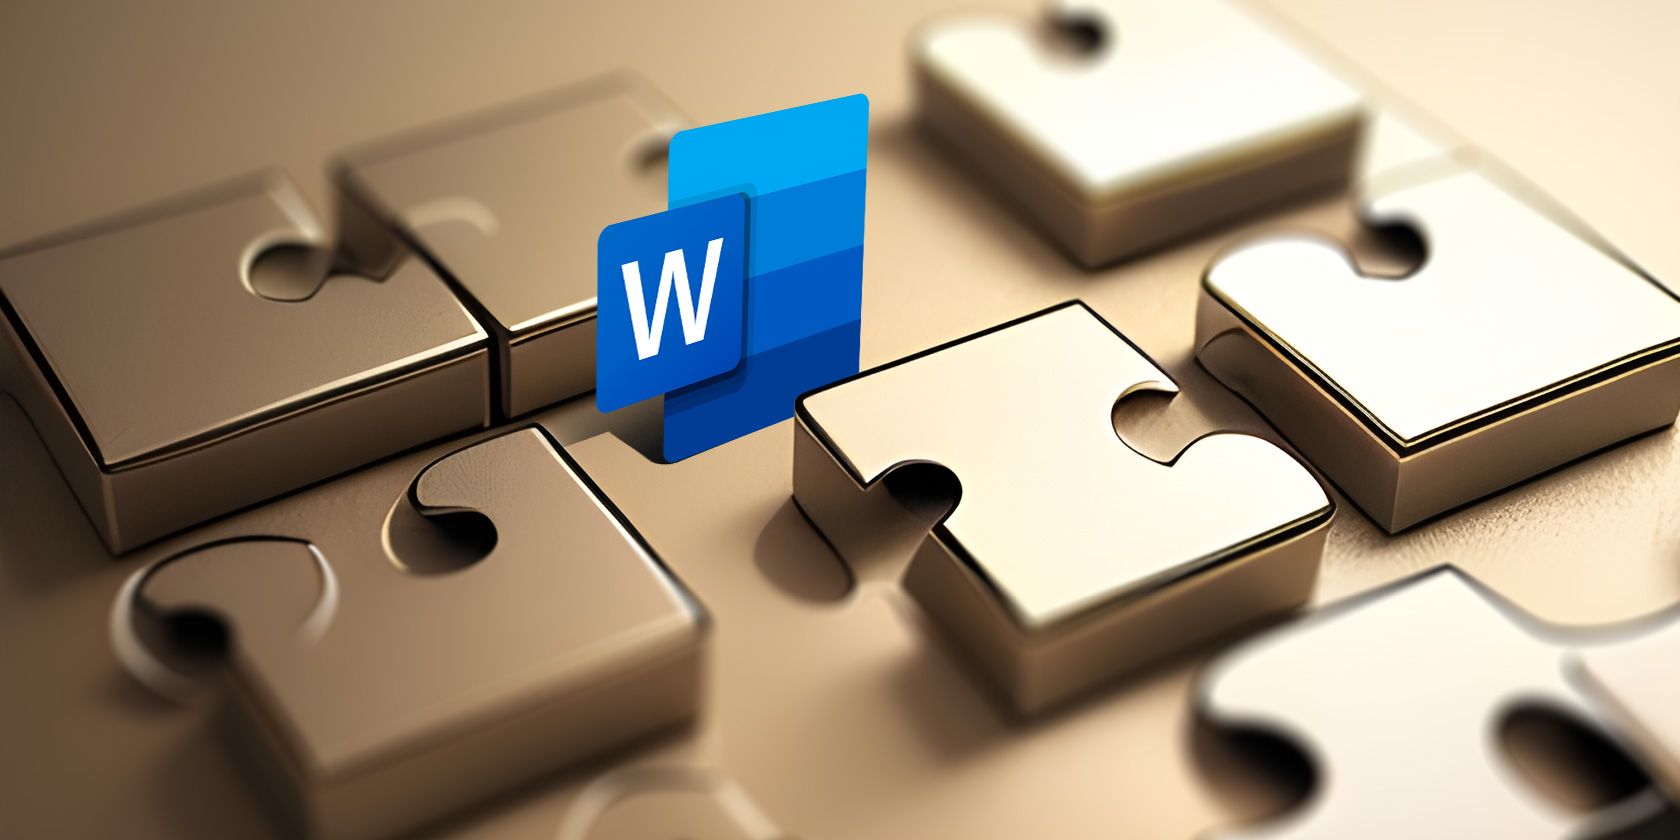 MS Word icon among puzzle pieces